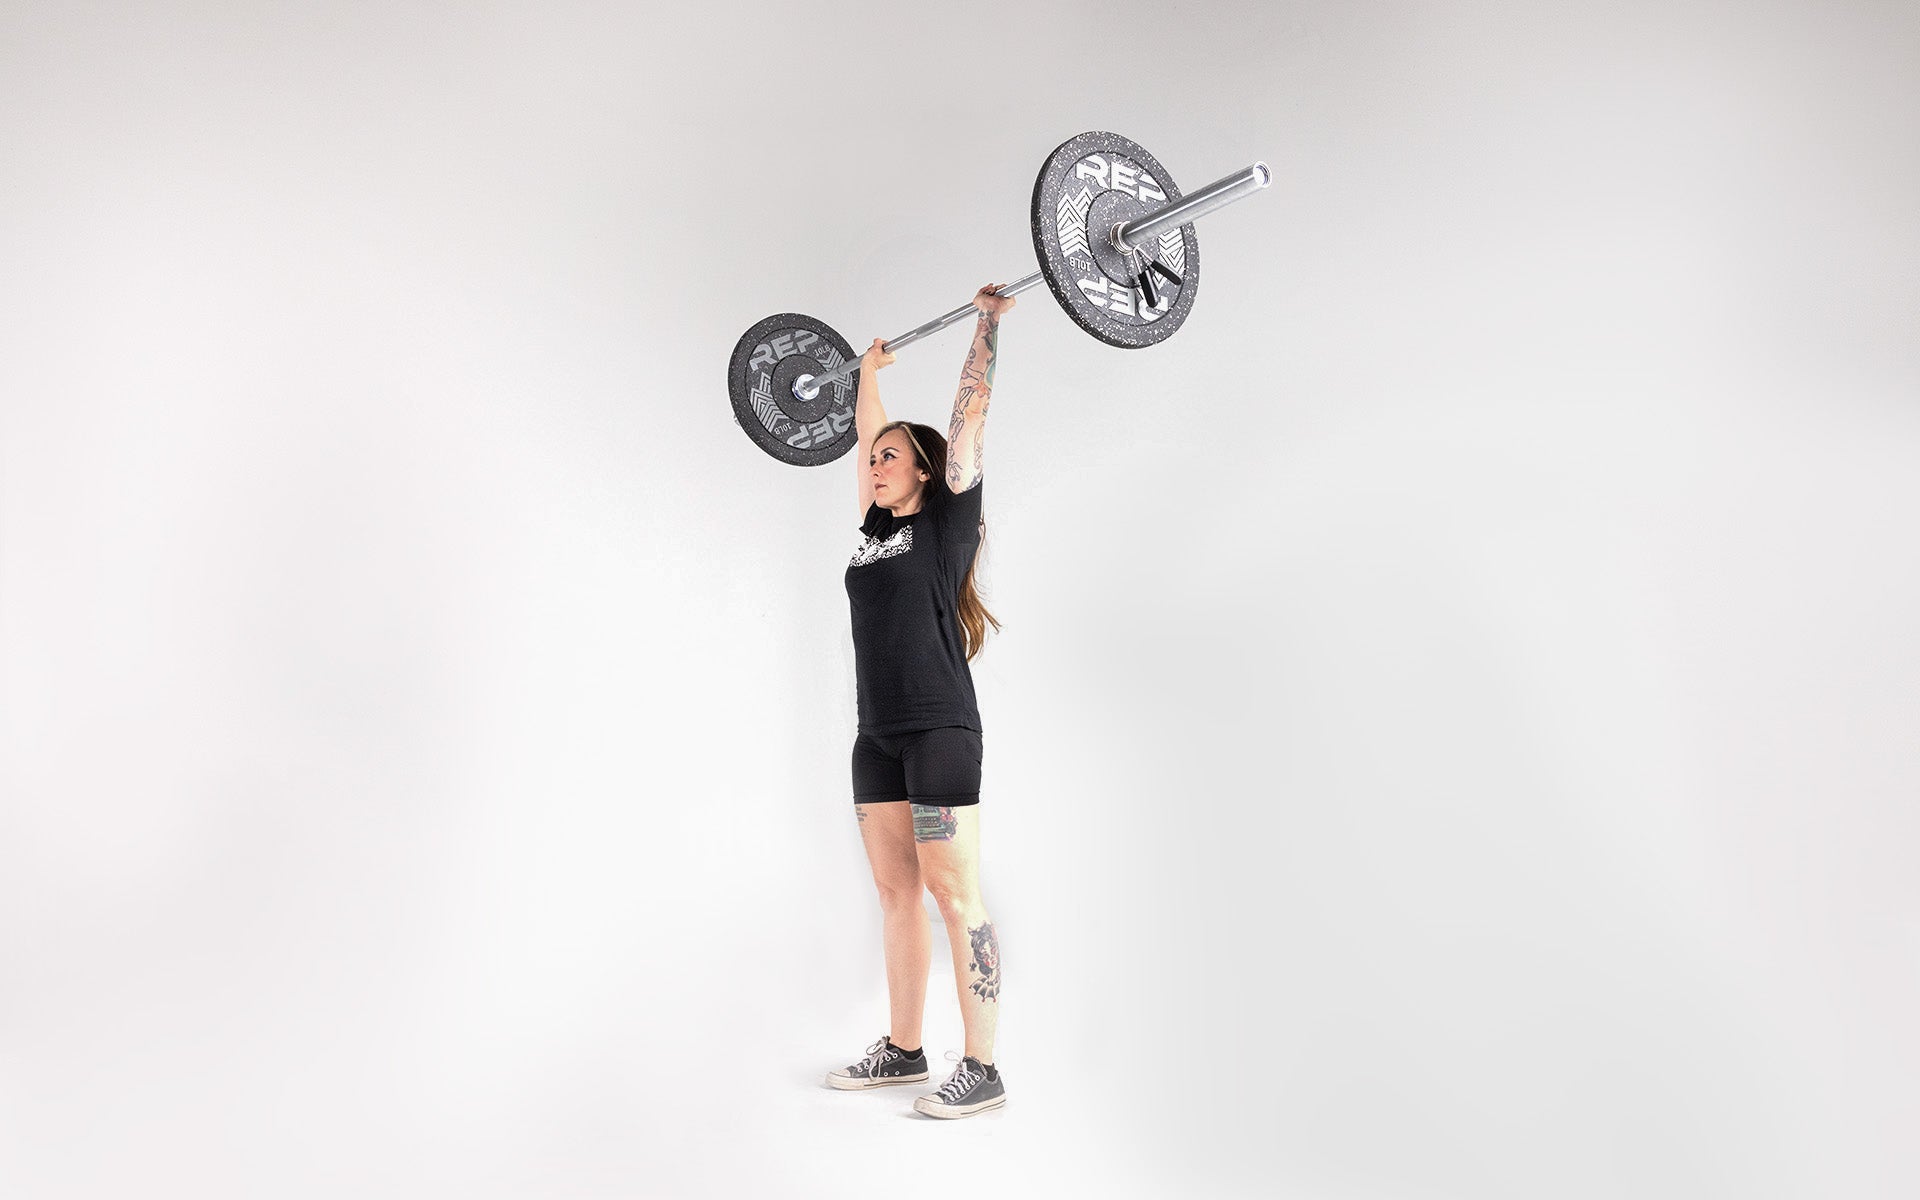 Lifter in the finish position of a shoulder press with a barbell overhead loaded with a pair of 10lb pinnacle bumper plates.